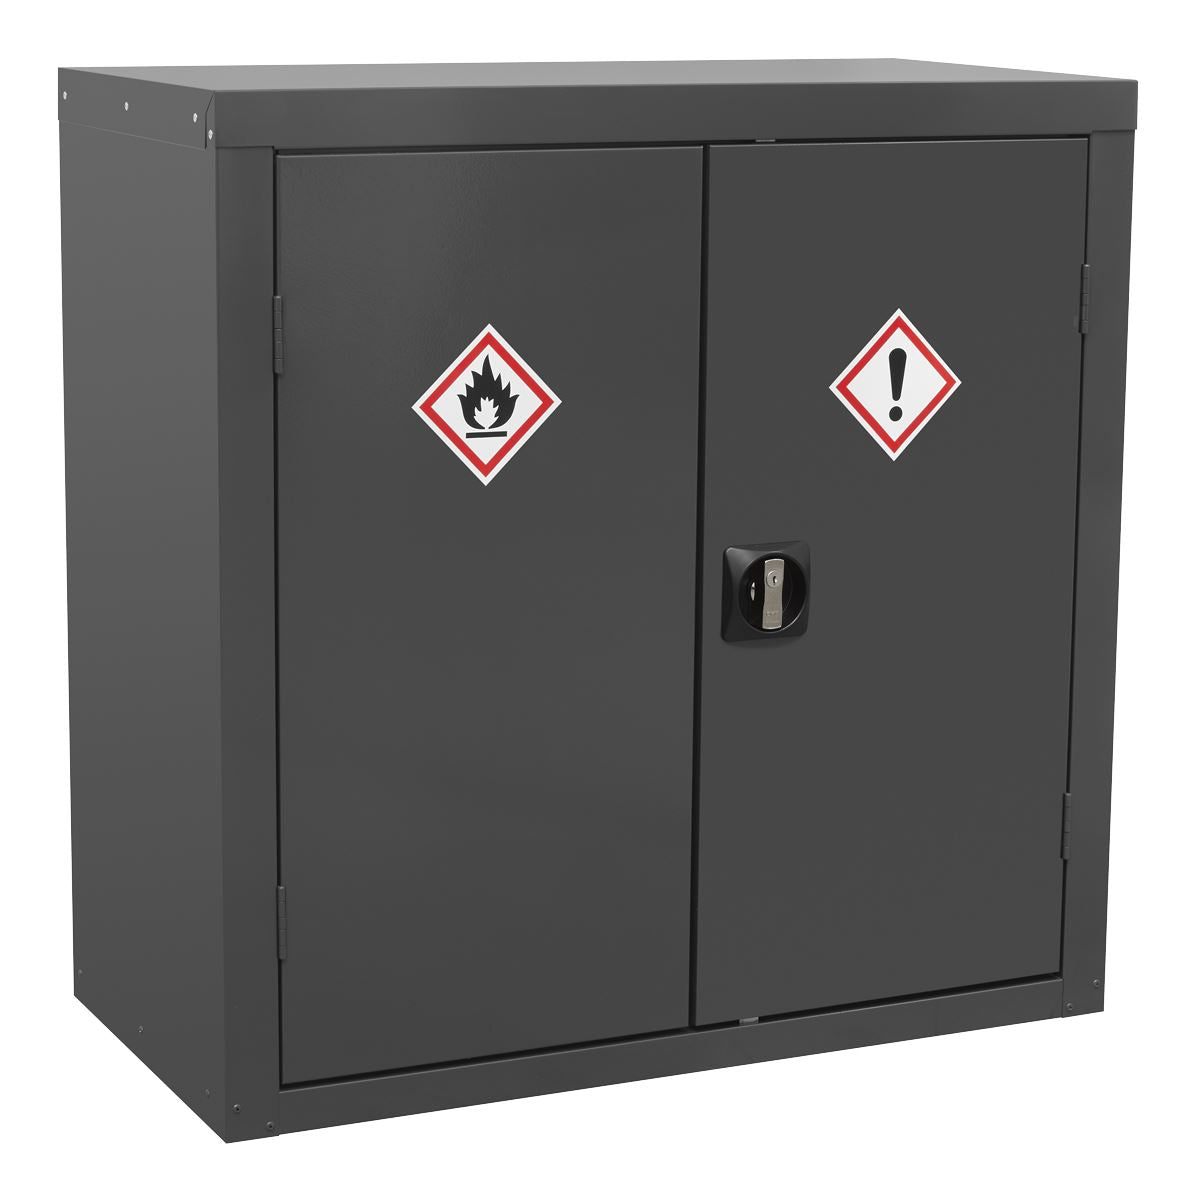 Sealey CoSHH Substance Cabinet 900 x 460 x 900mm